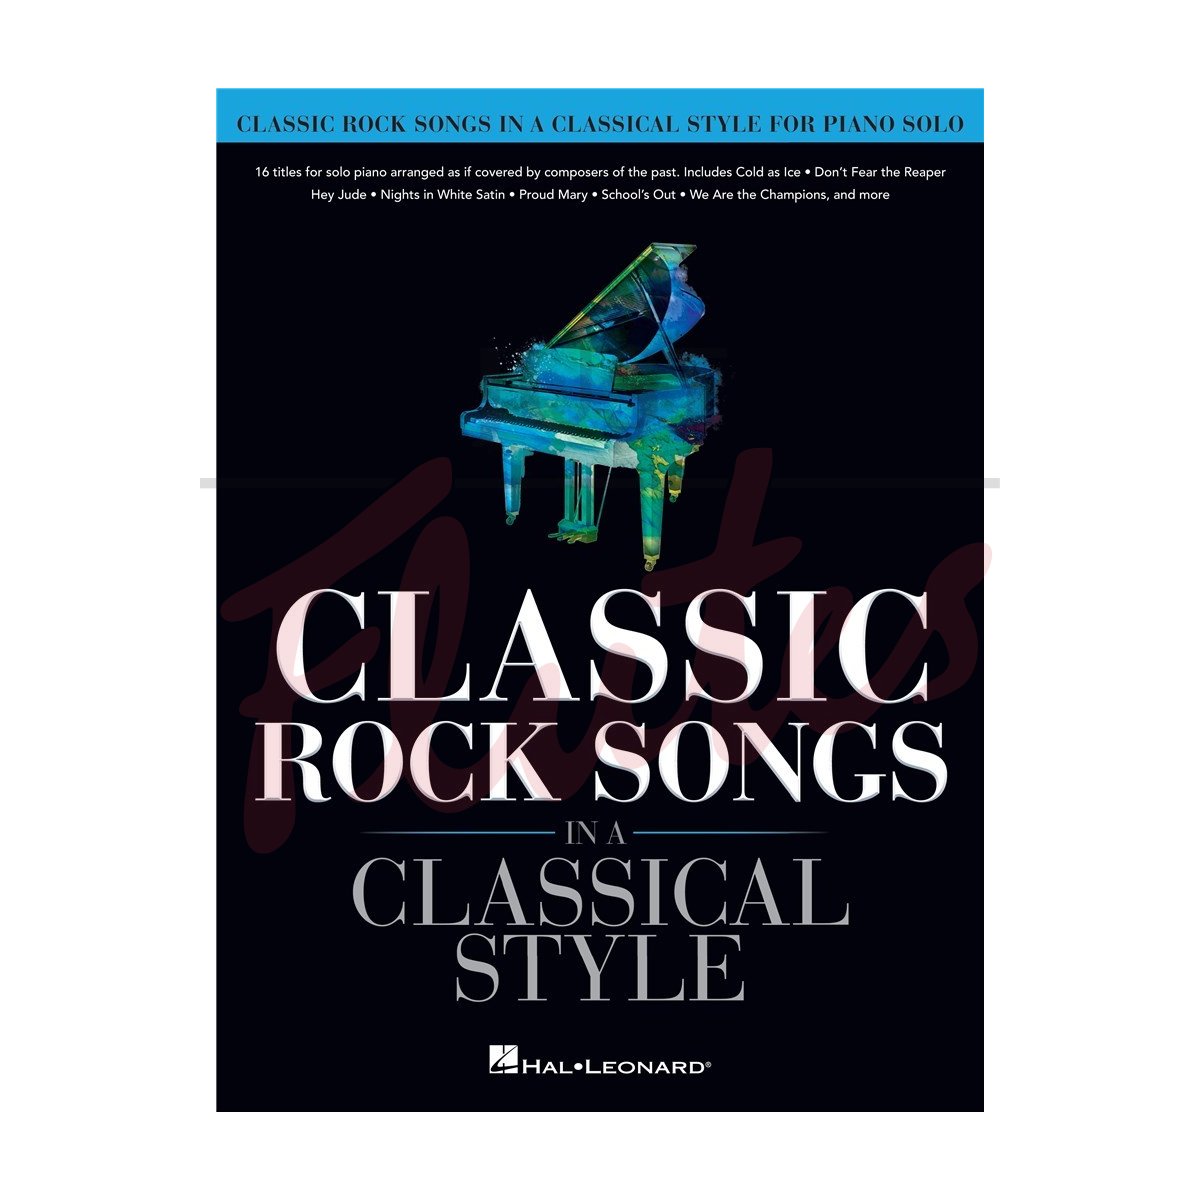 Classic Rock Songs in a Classical Style for Piano